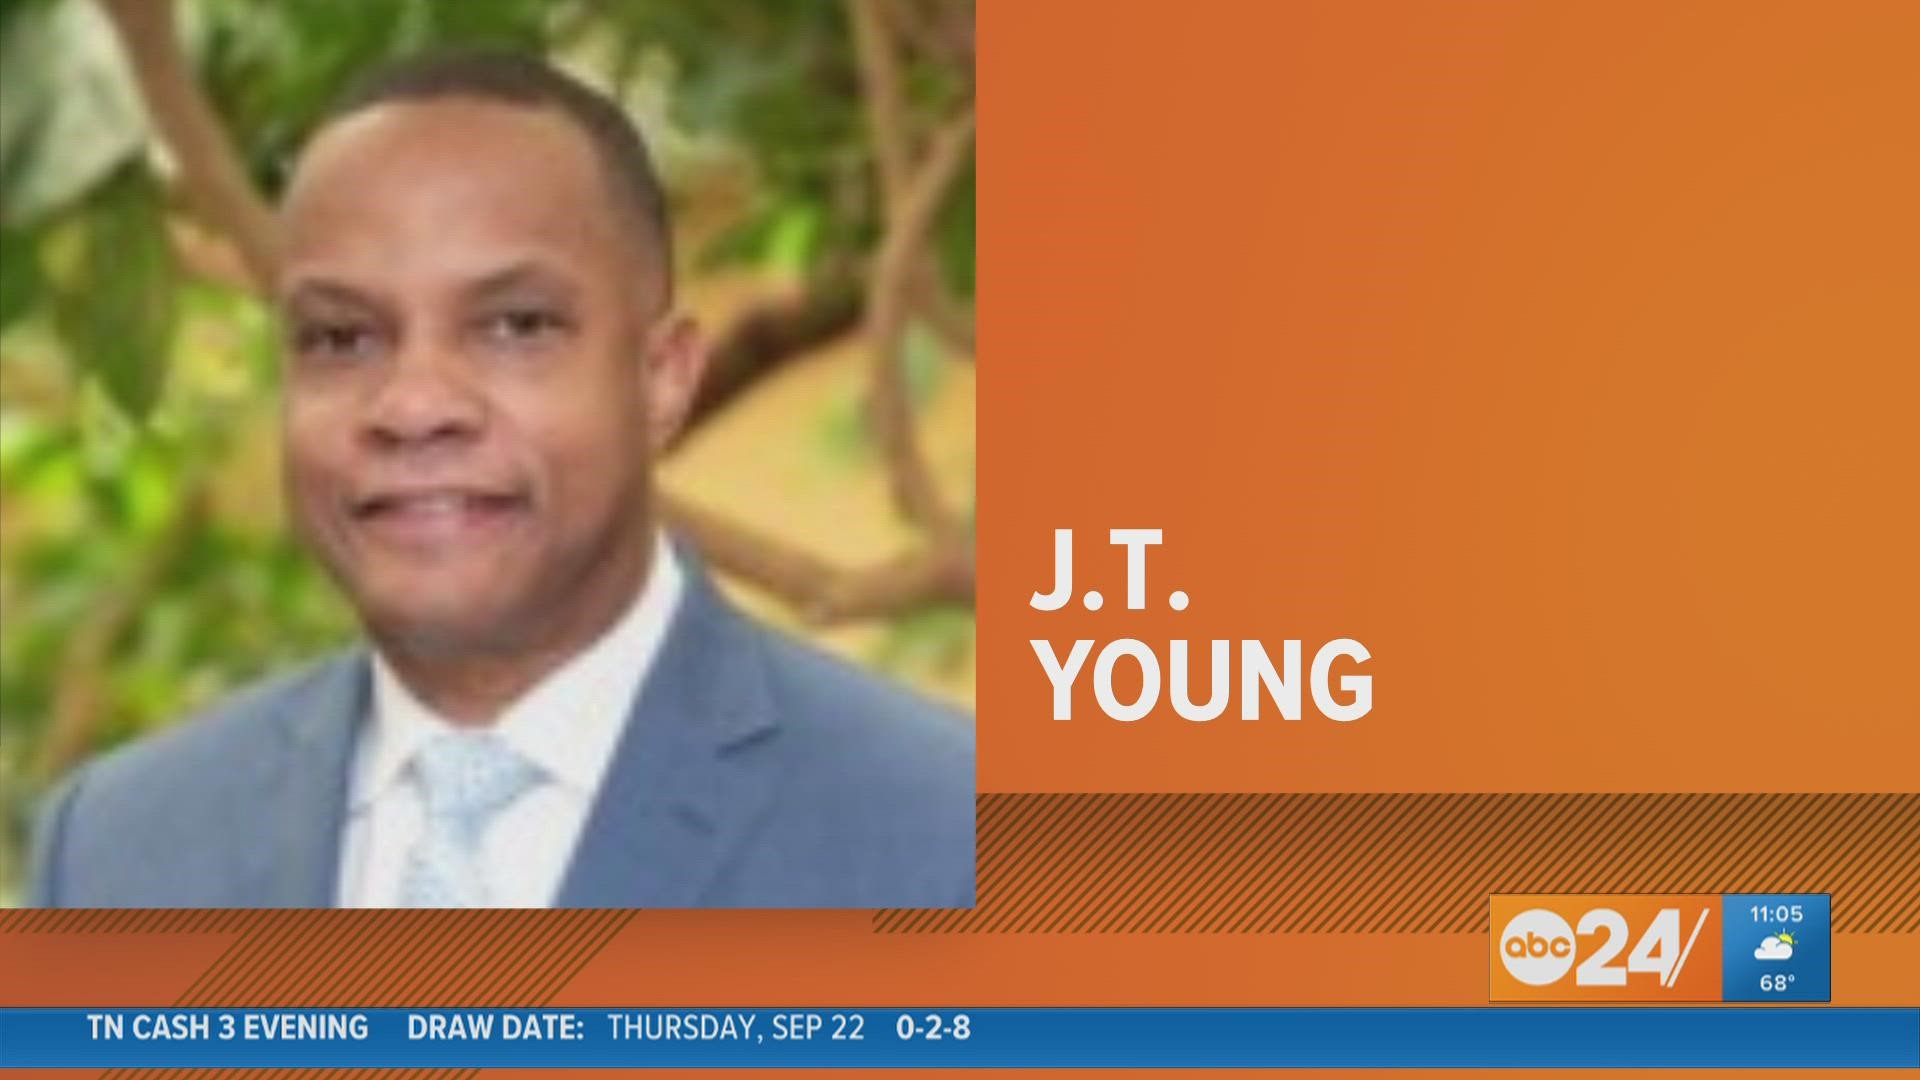 J.T. Young joined MLGW in March 2018 and served as Memphis Light, Gas and Water’s 11th president.